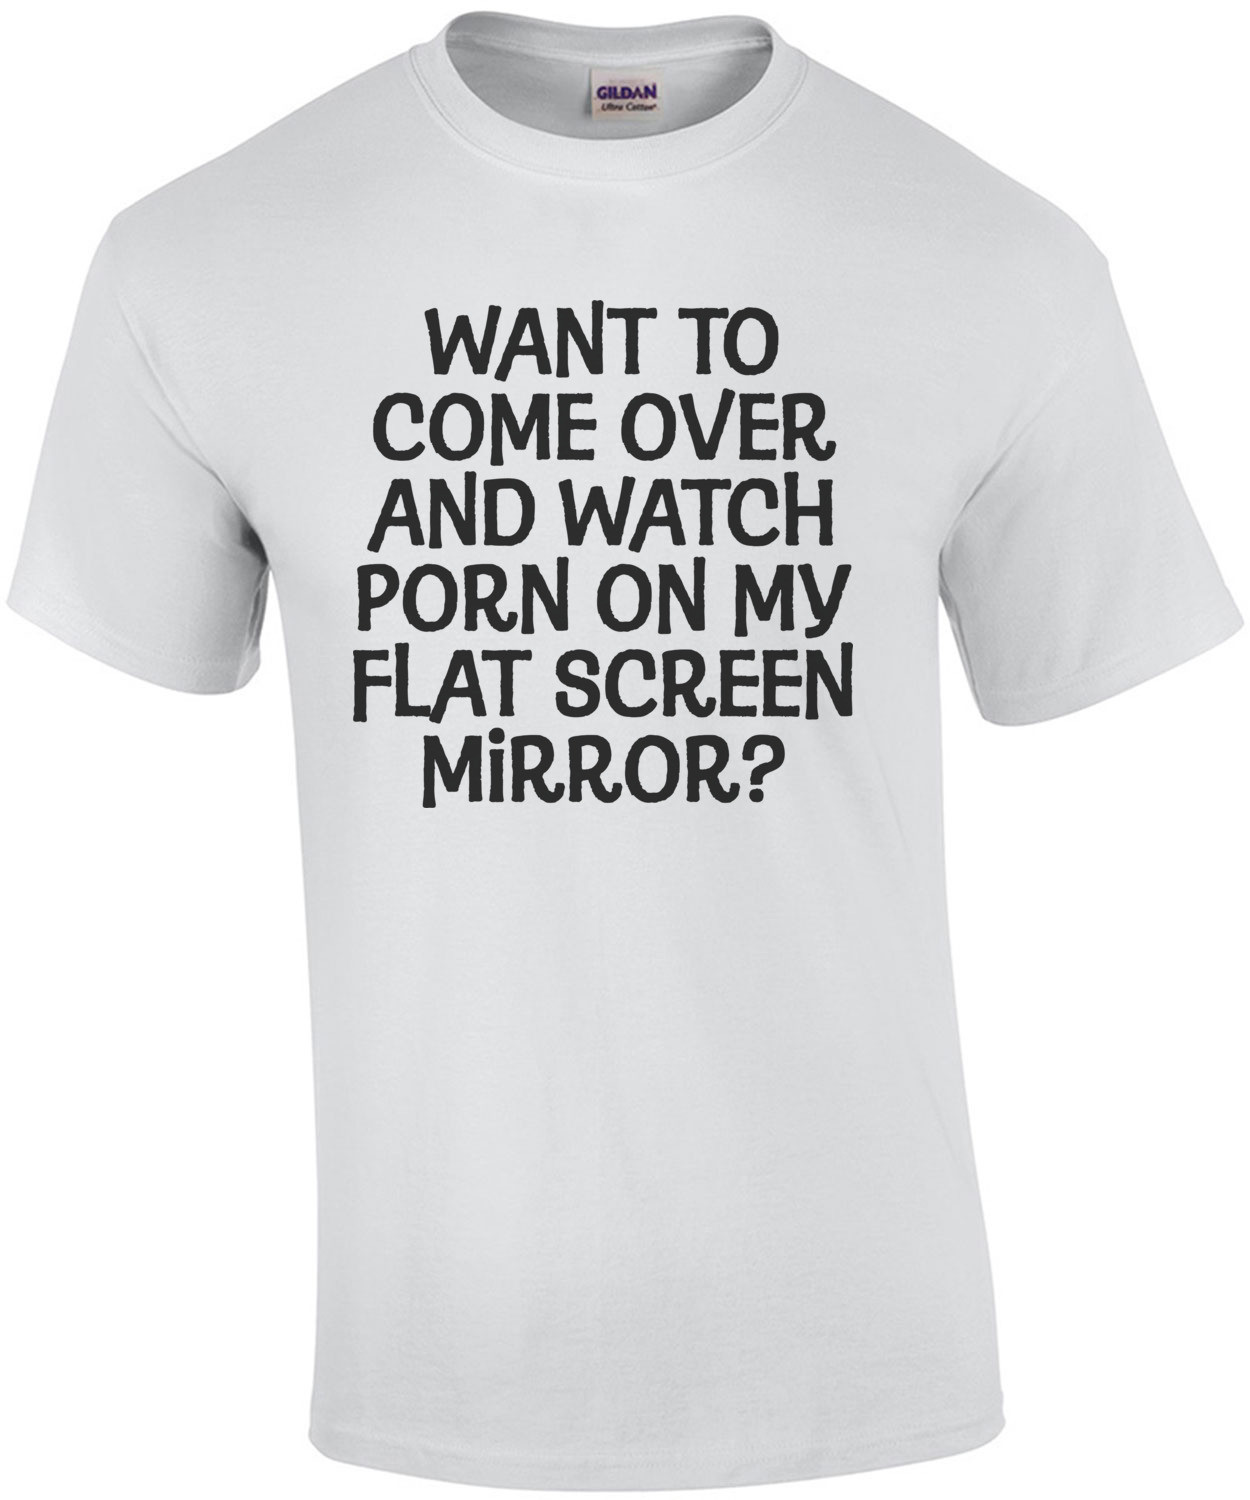 Want to come over and watch porn on my flat screen mirror? Funny Shirt